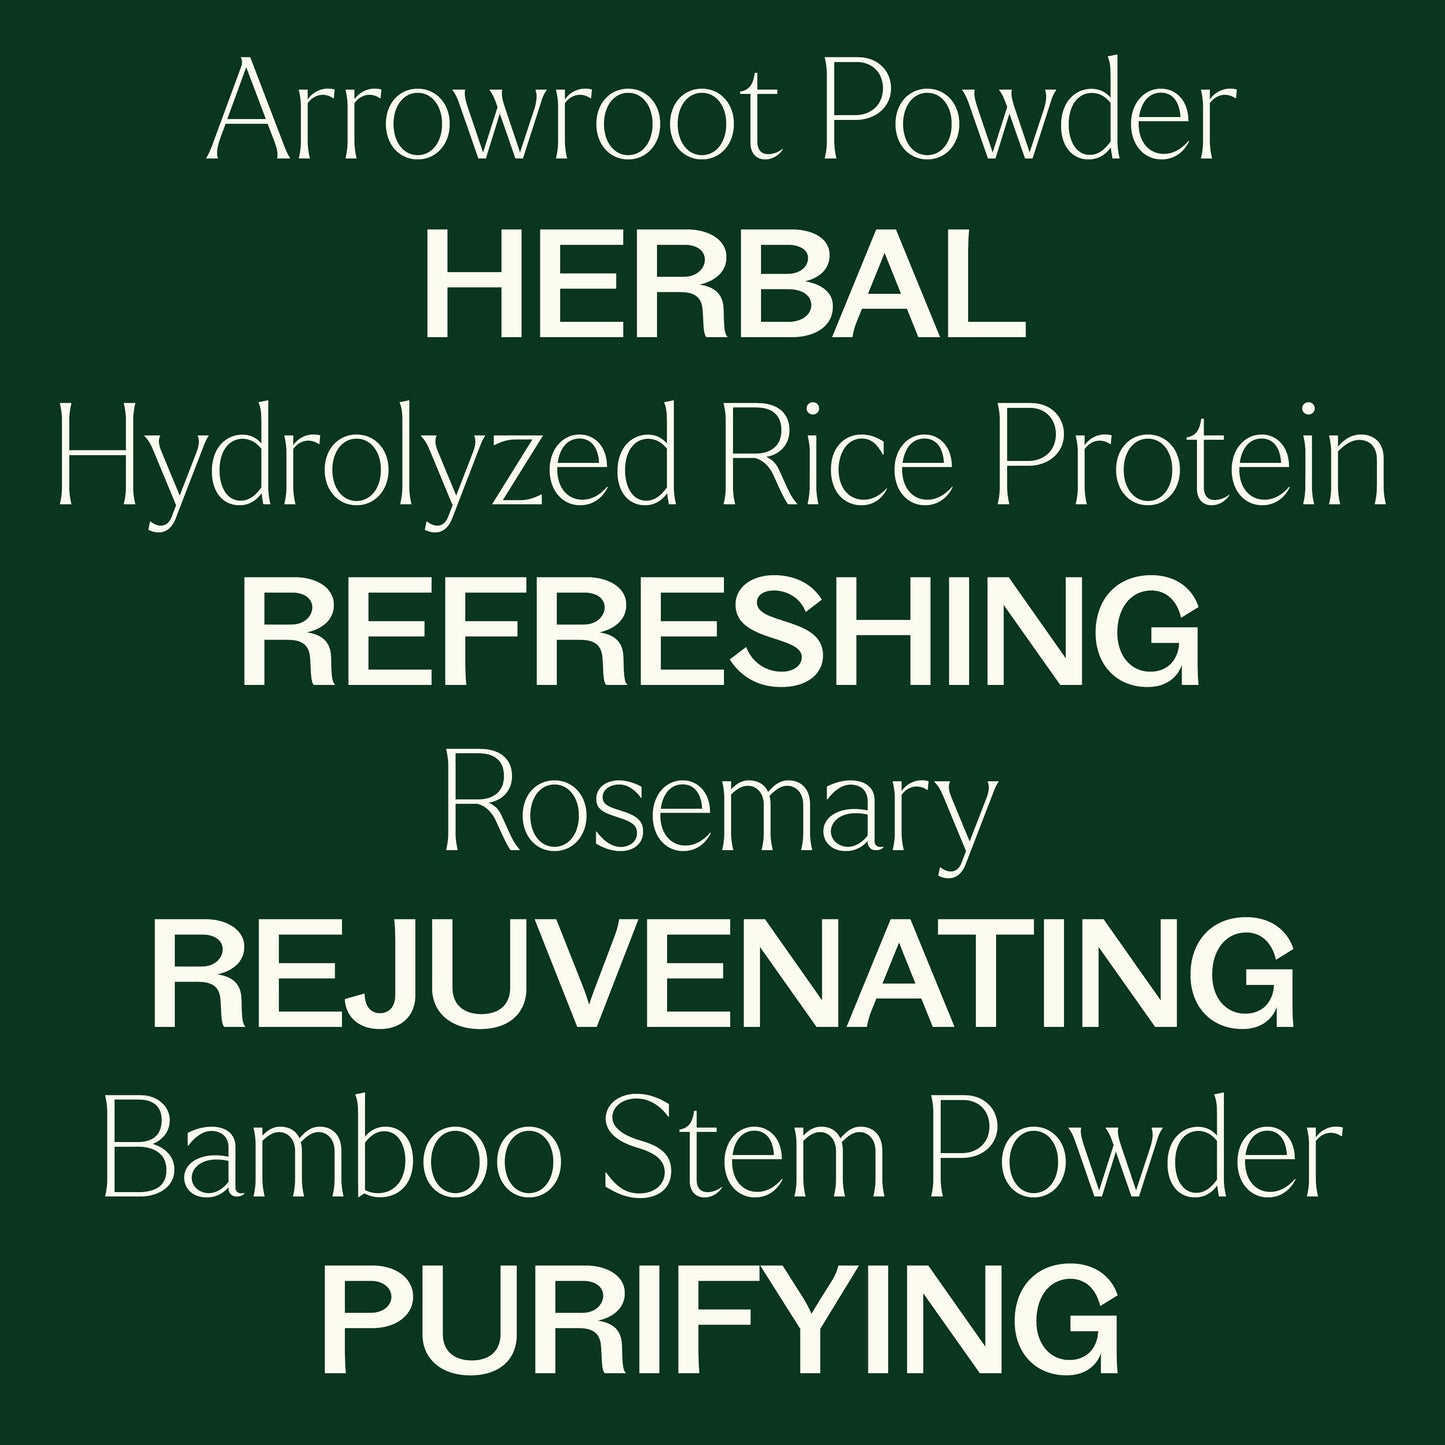 Hair Therapy Dry Shampoo with arrowroot powder, rice protein, rosemary, bamboo stem powder